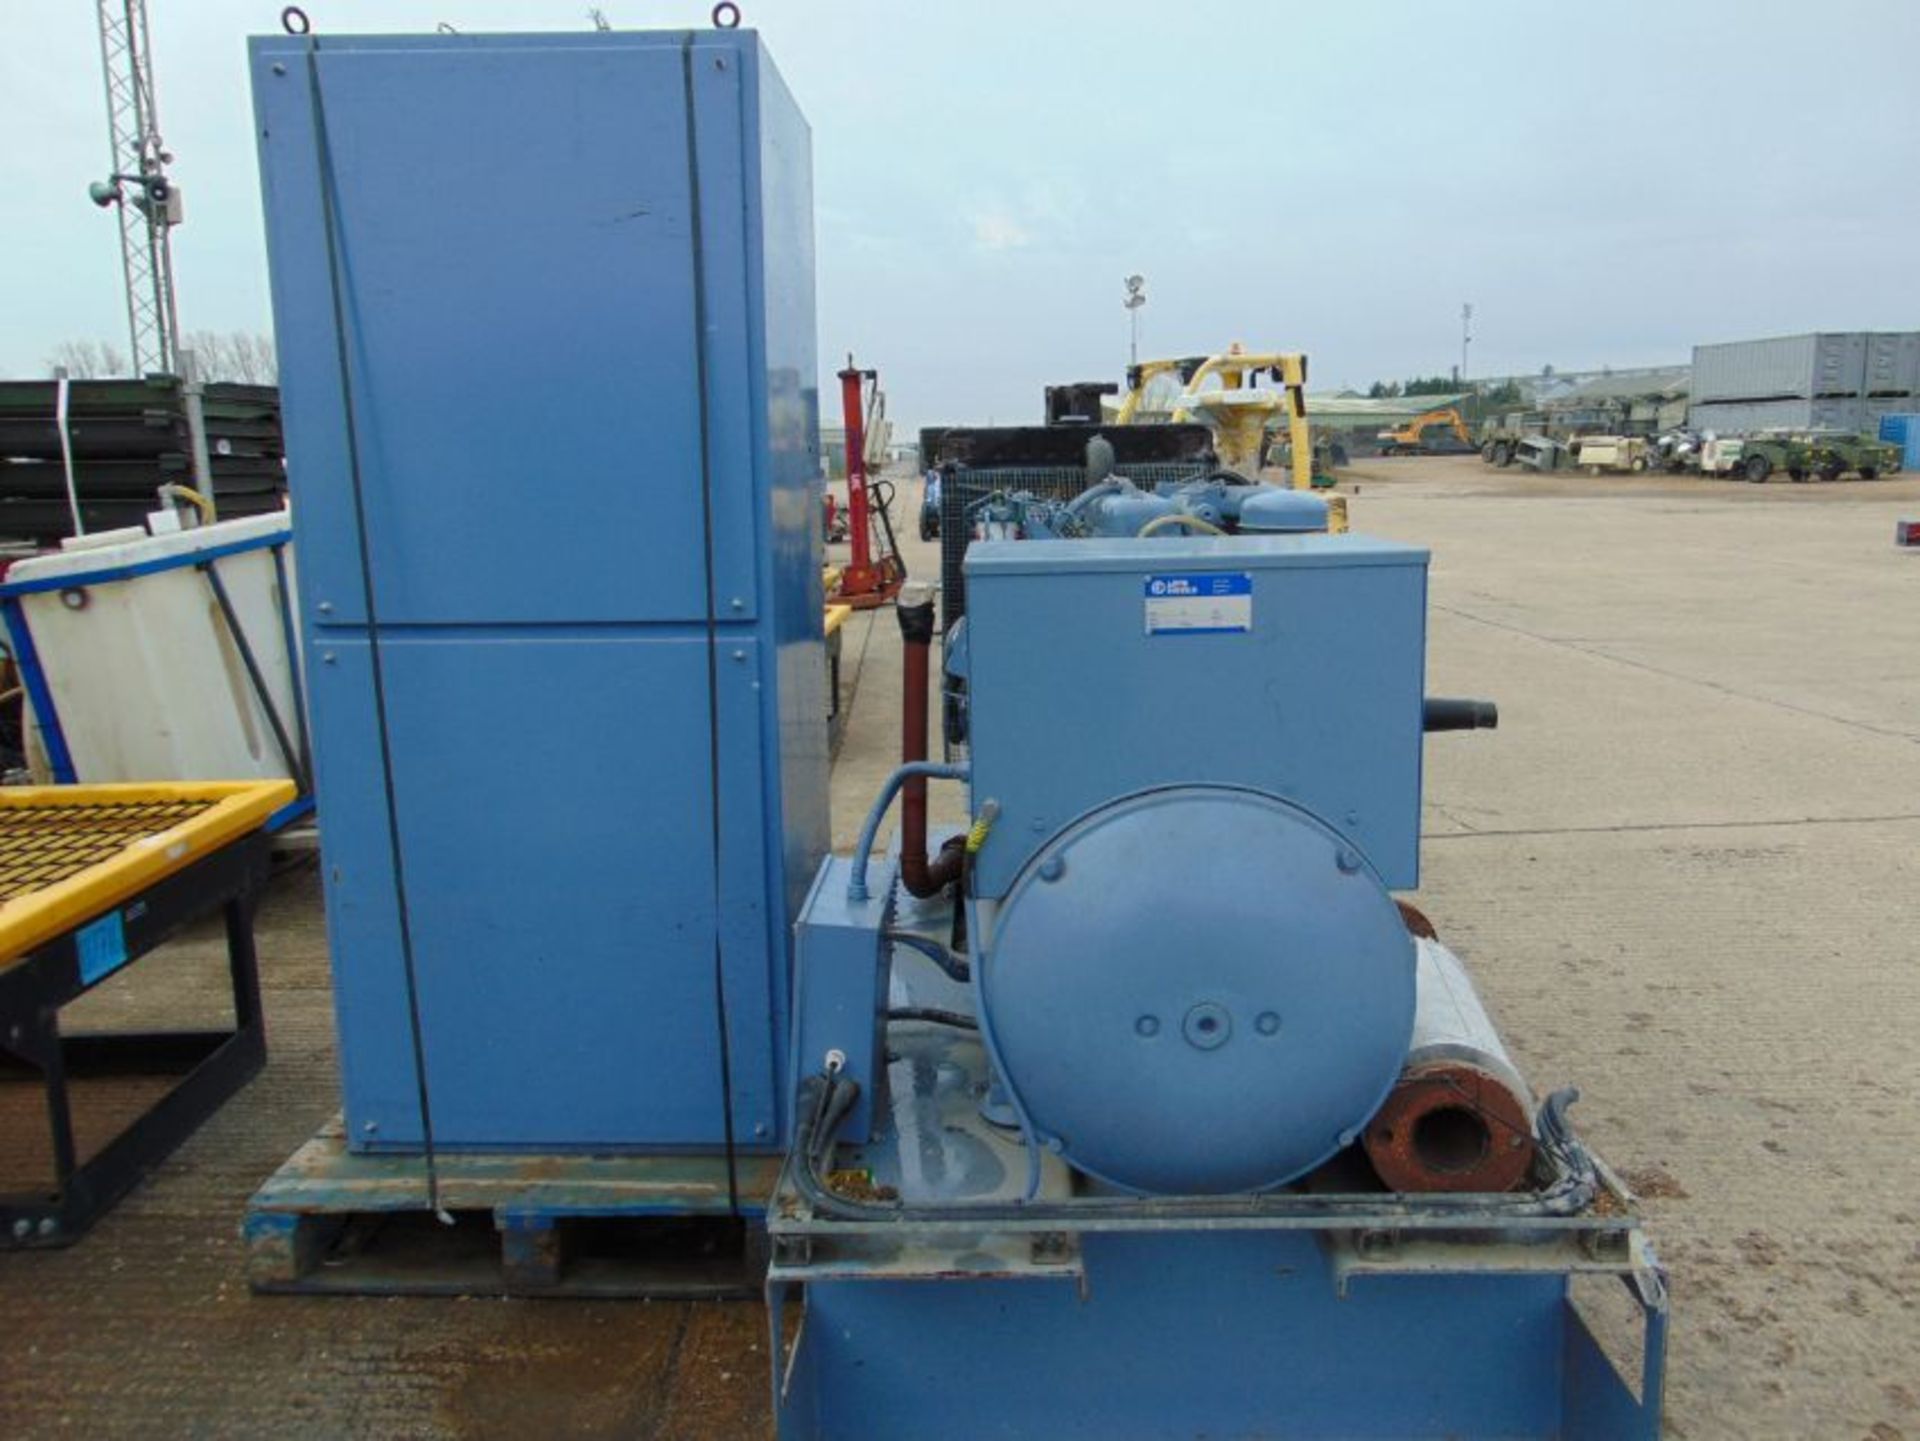 Auto Diesel 85 KVA 68 Kw 3 Phase 415/240V Standby Mains Faliure Perkins Diesel Generator 807 HOURS! - Image 5 of 20